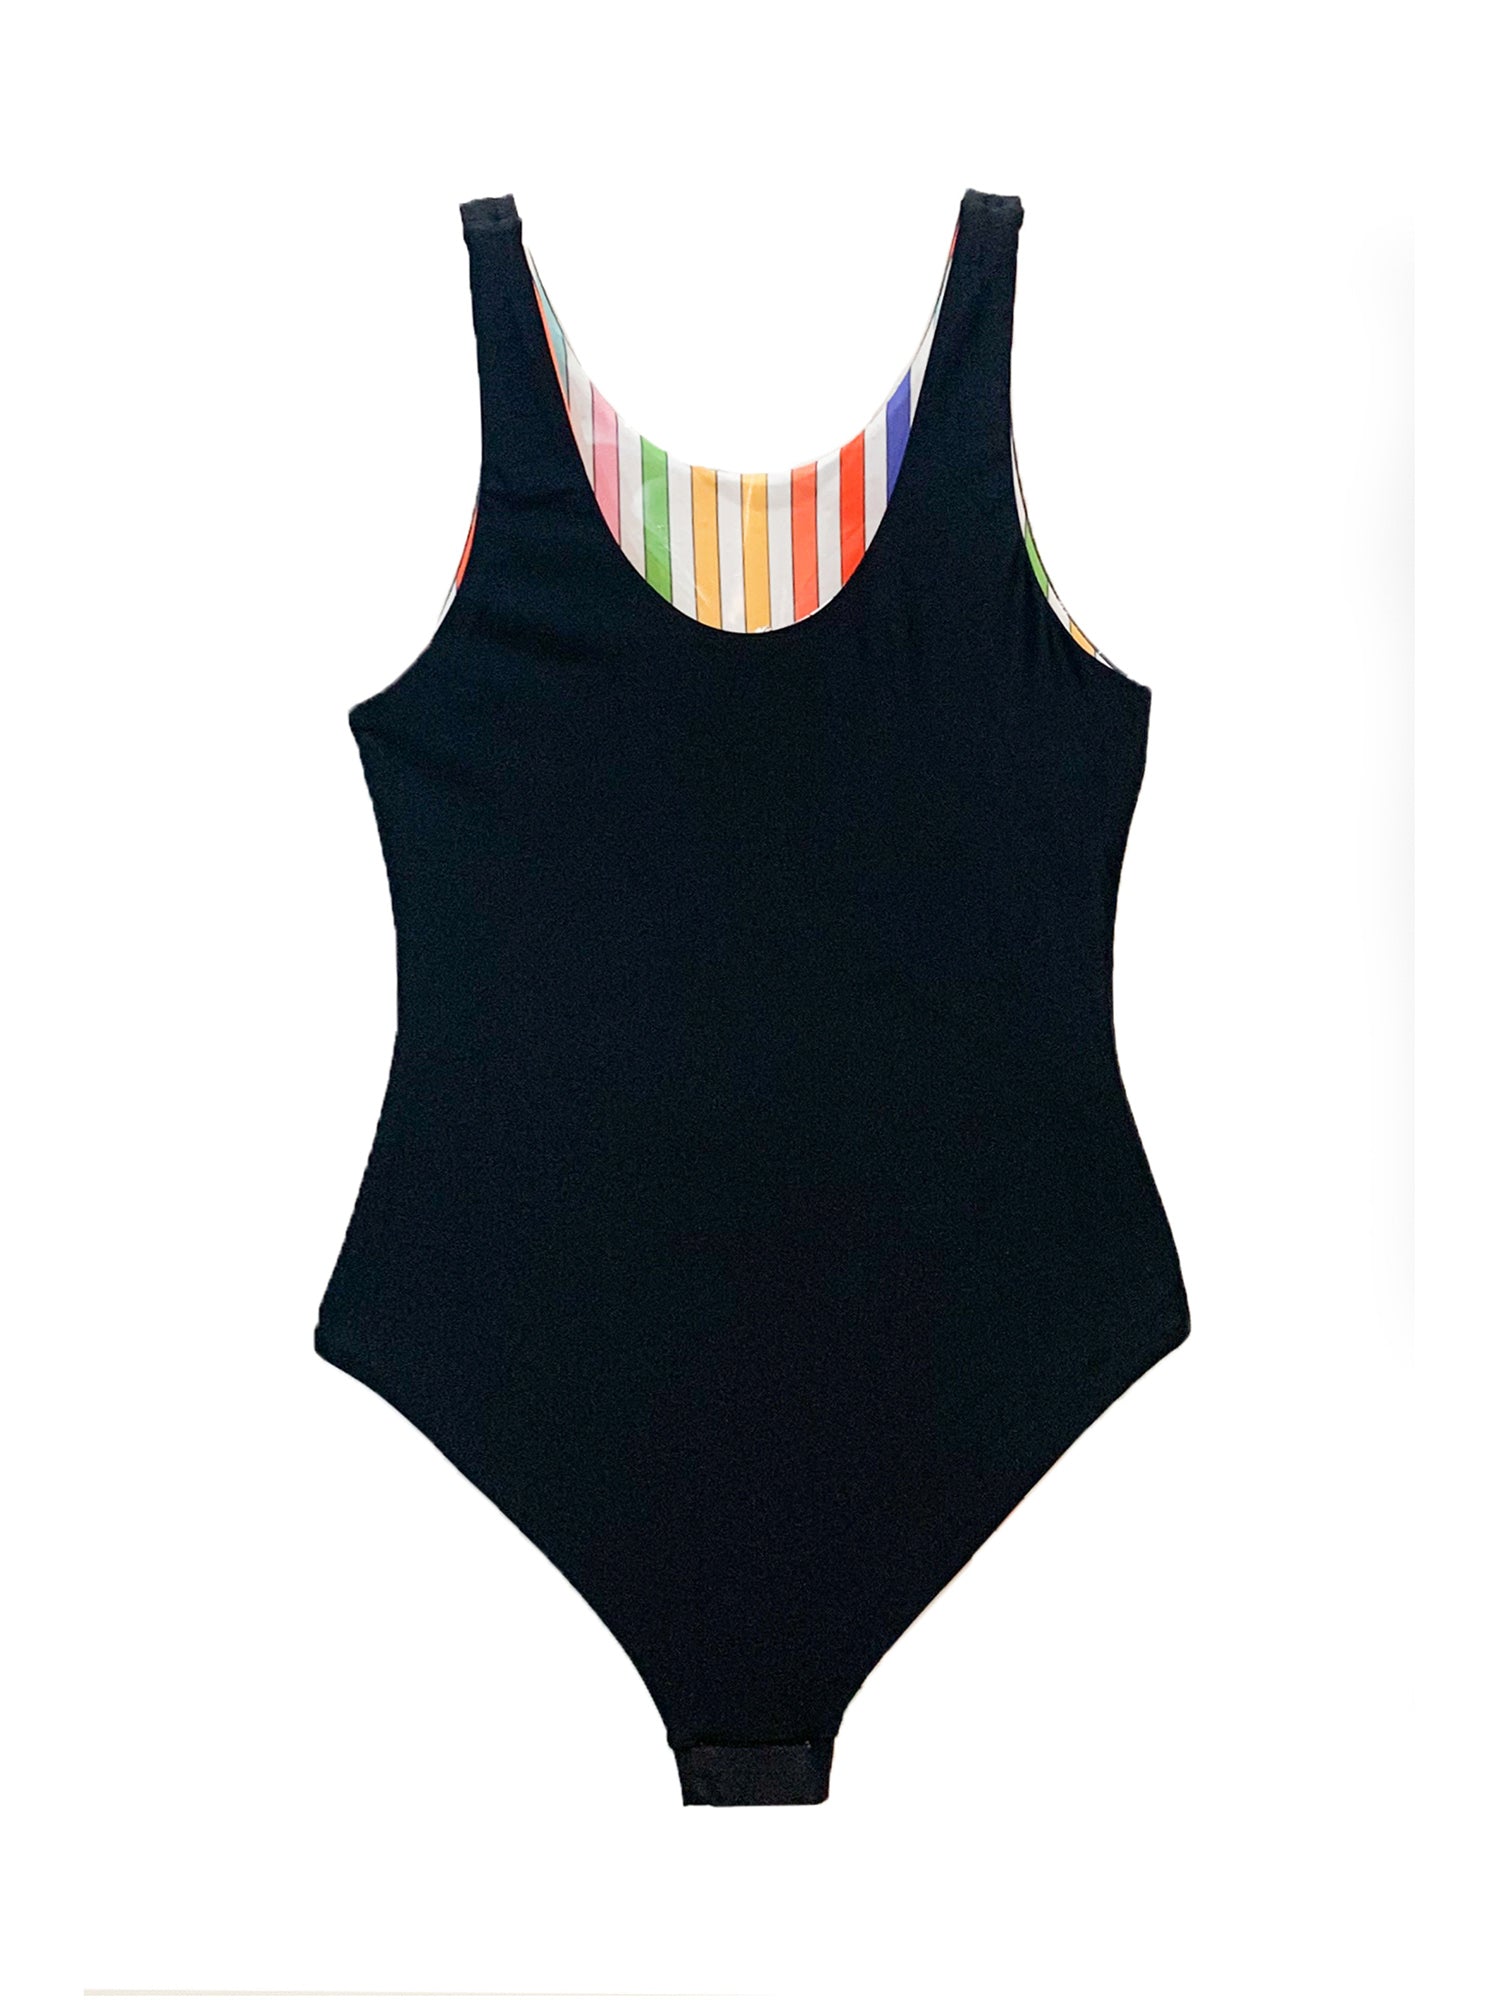 Shop Rebel Reversable Printed Swimsuit | Girls Apparel by Limeapple